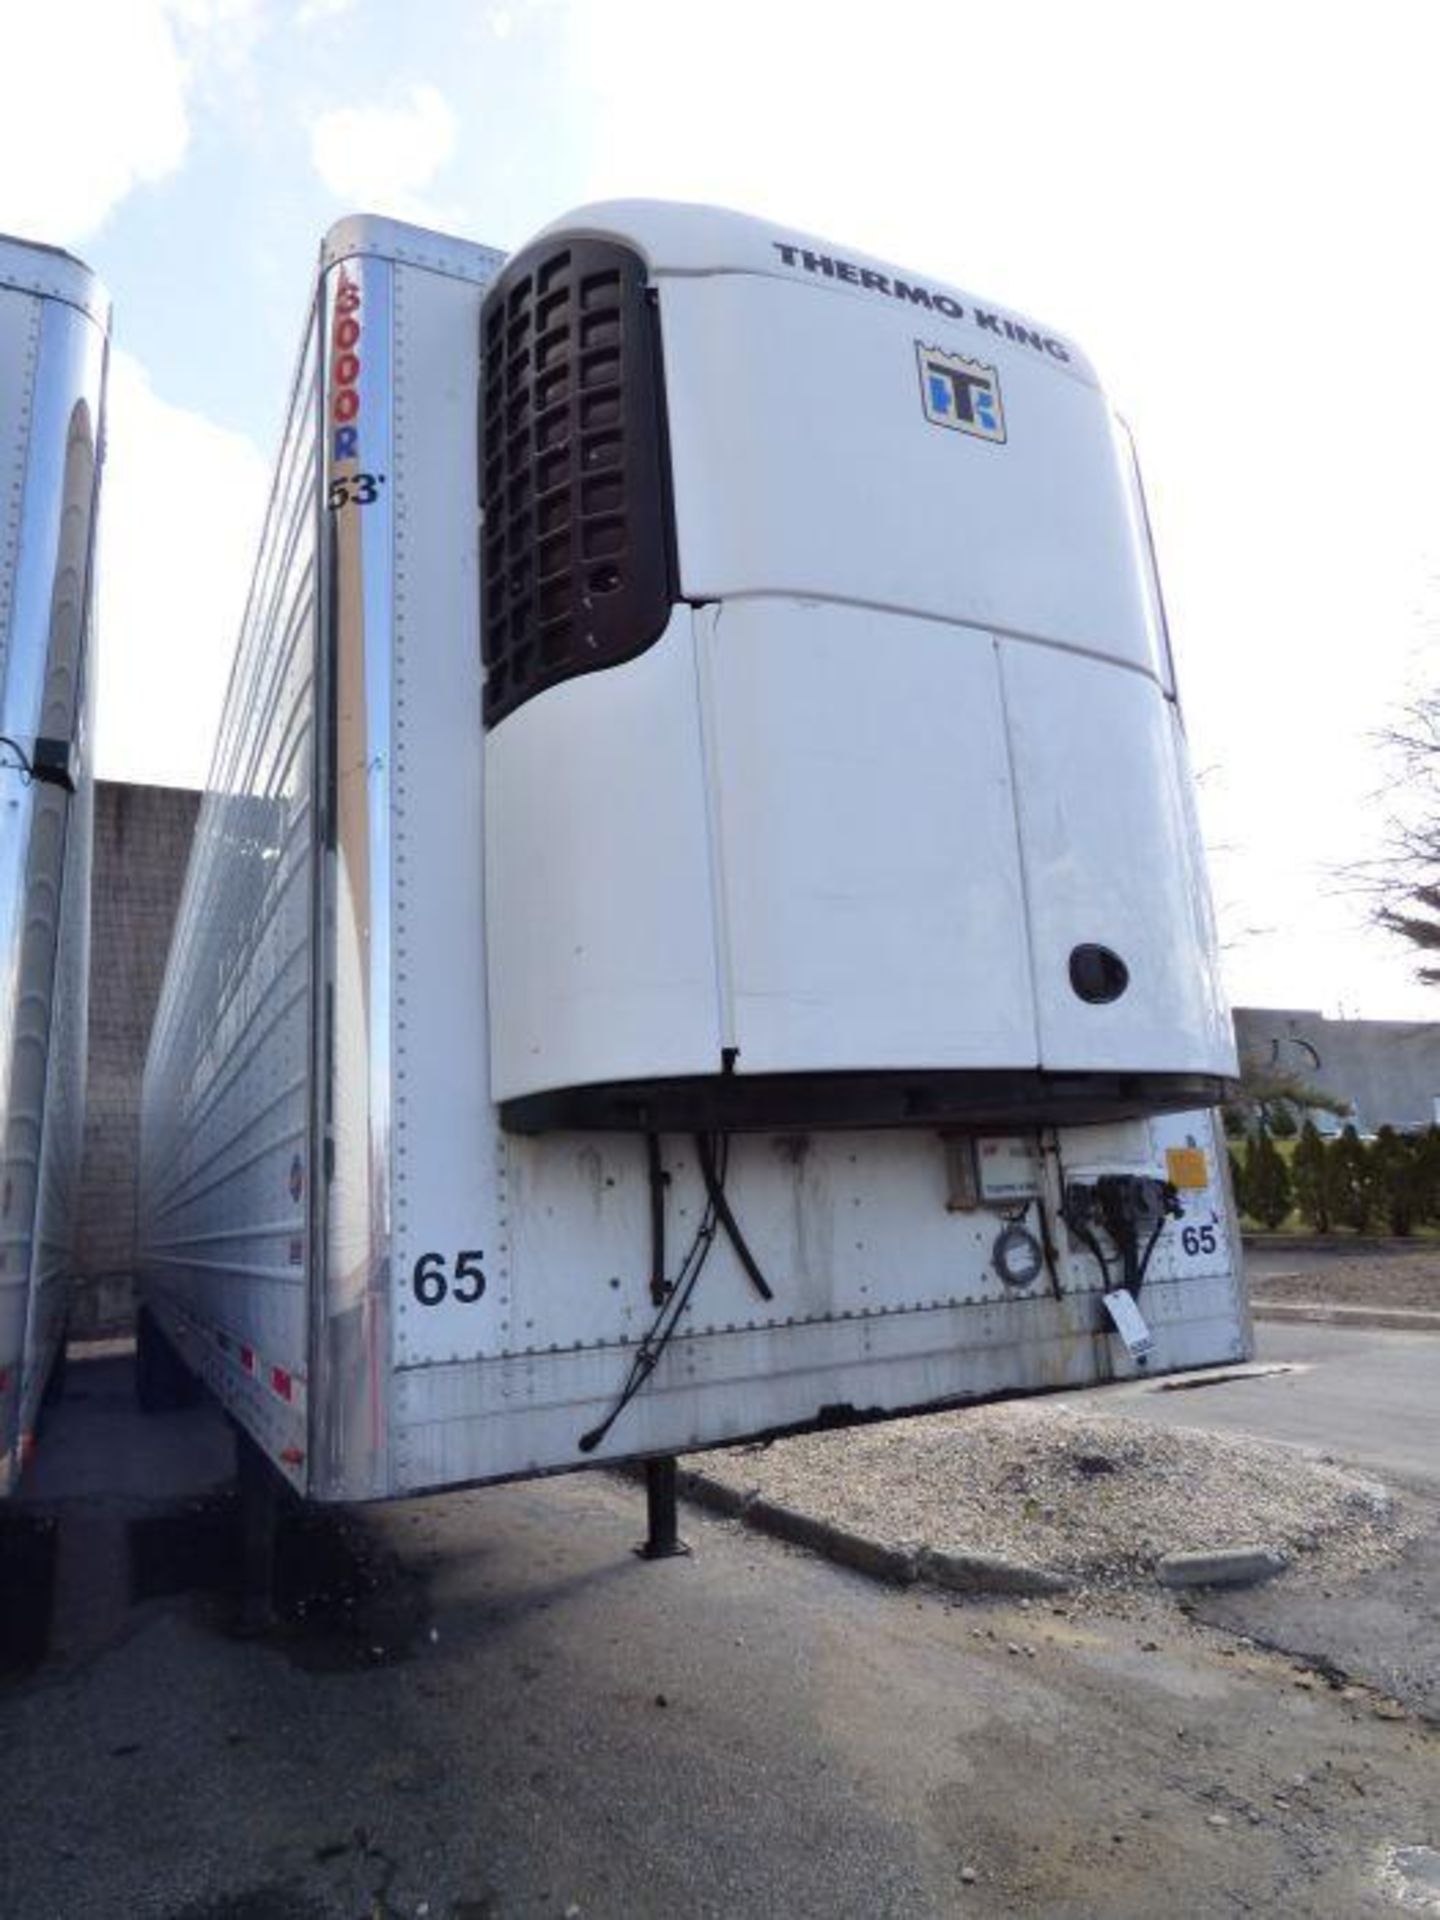 2013 Utility Reefer Trailer, 53 Foot - Image 2 of 13